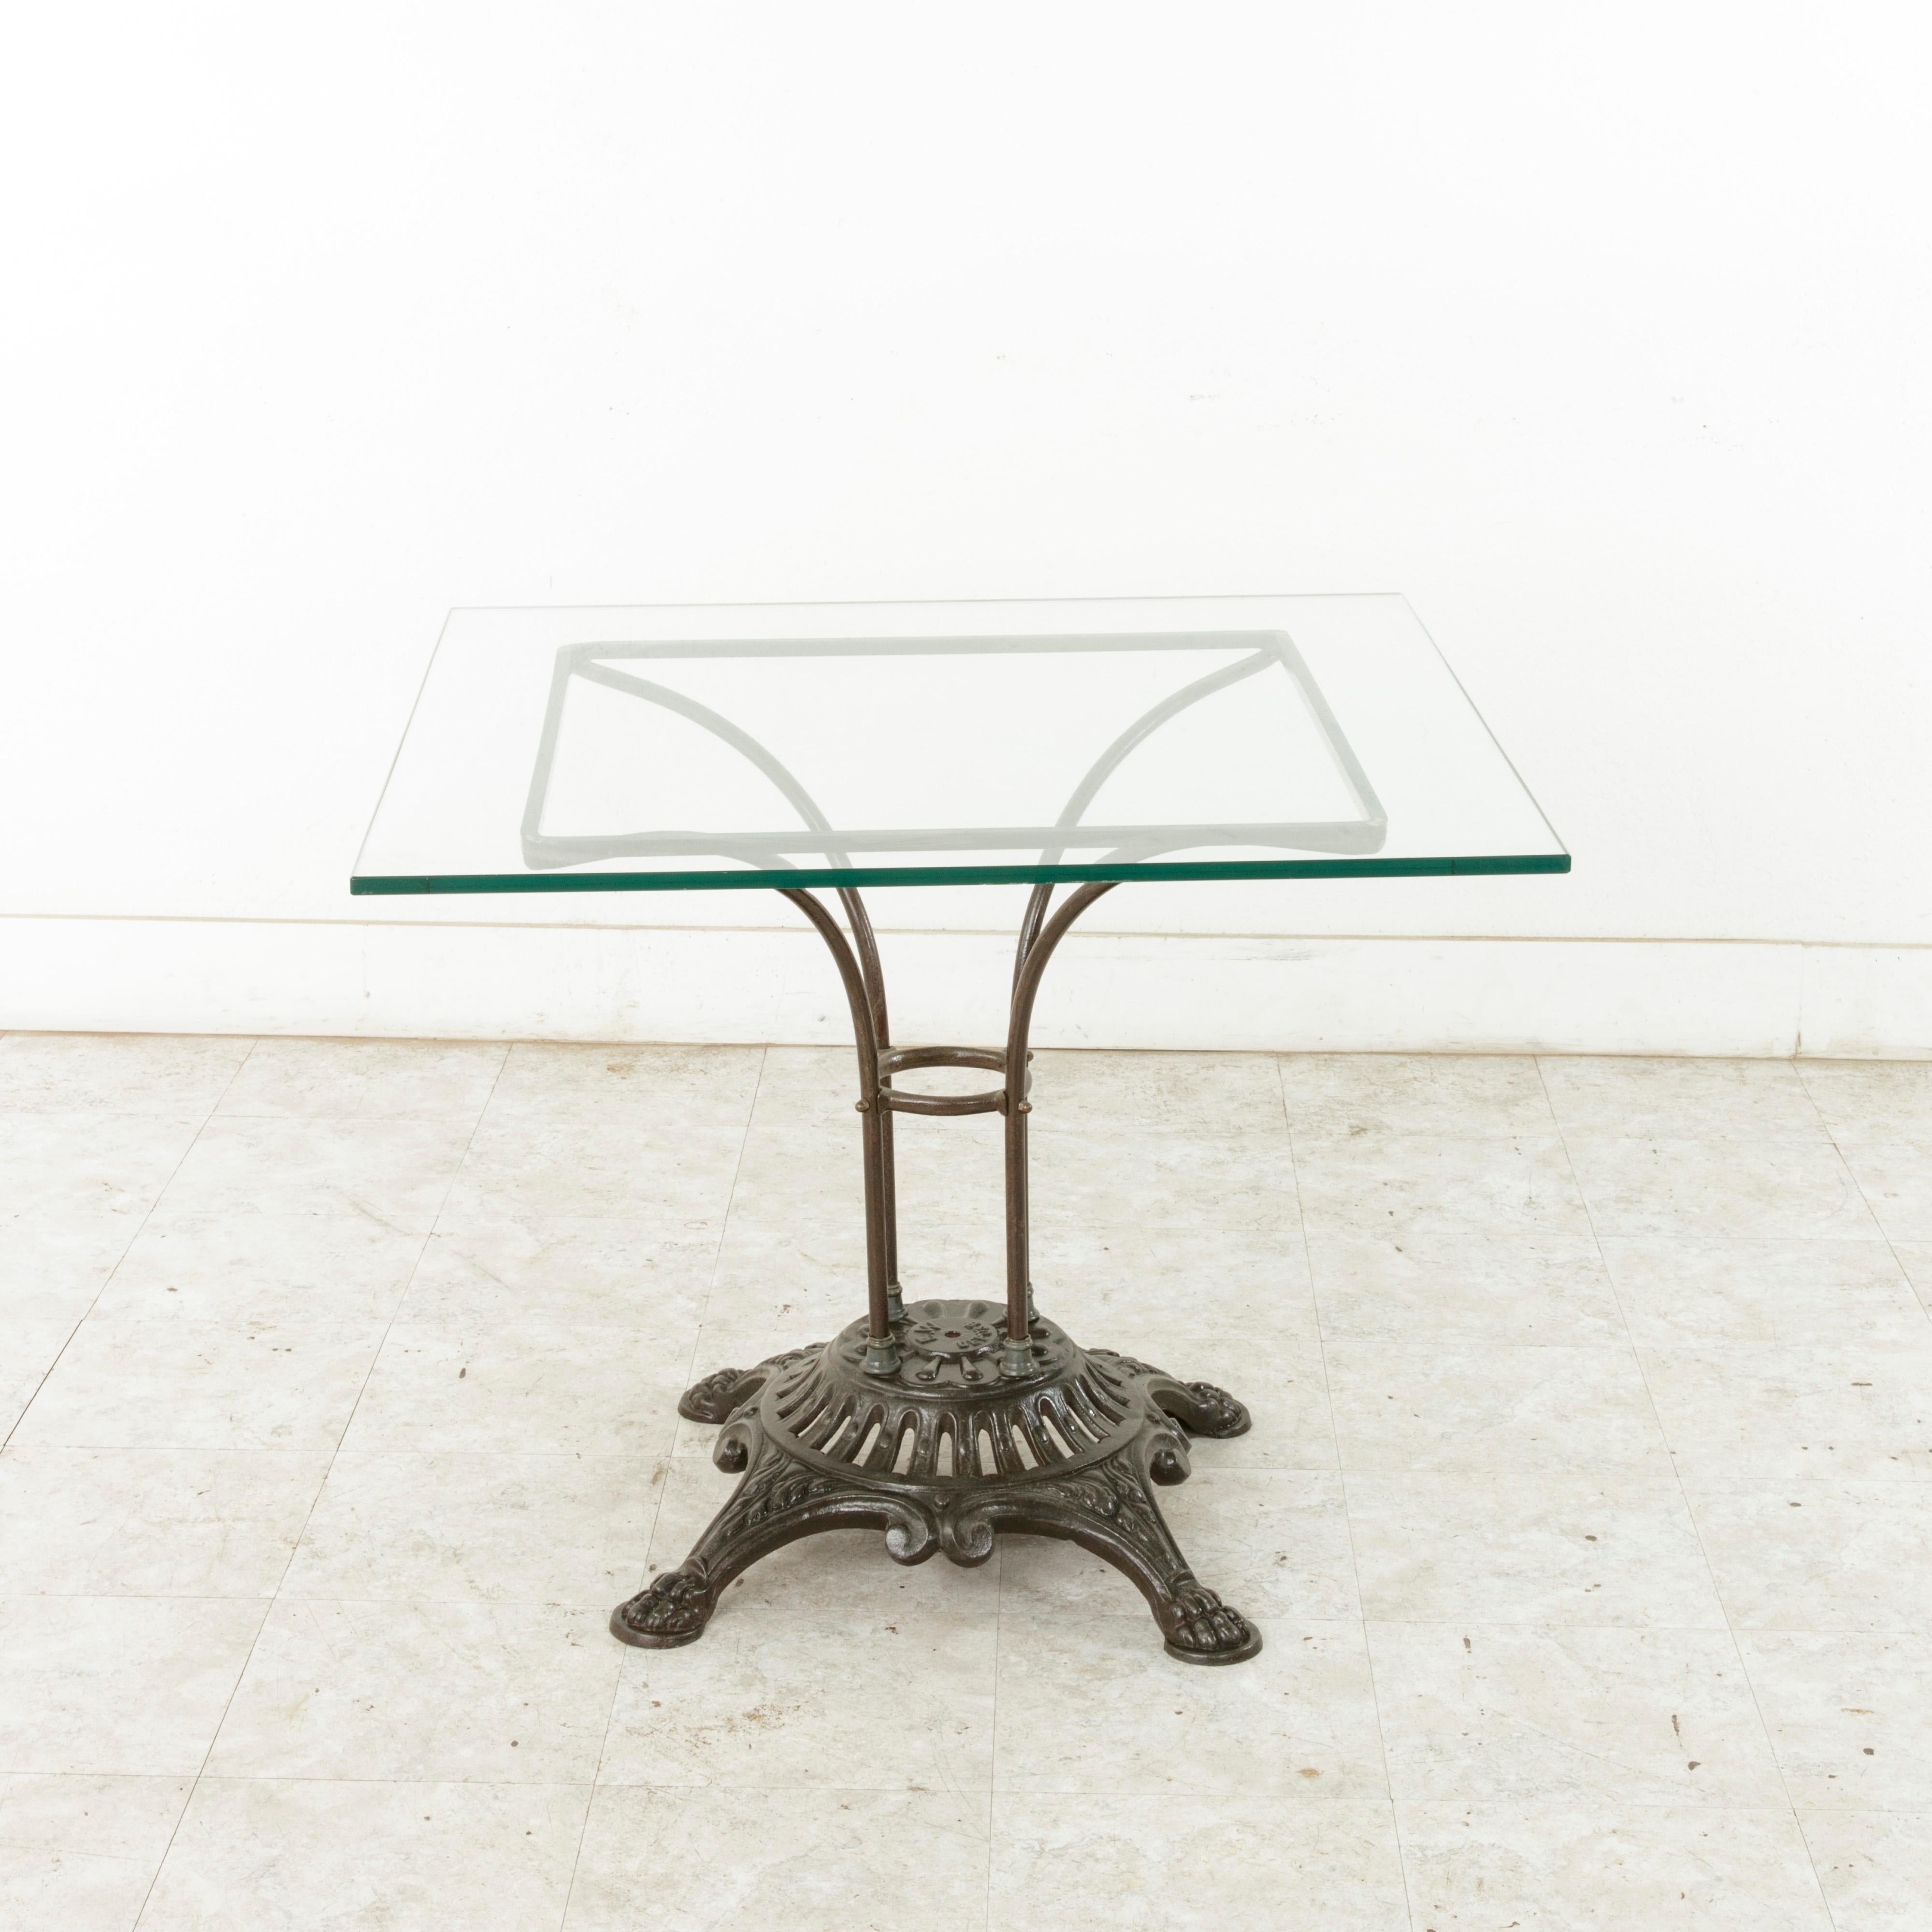 This French garden table from the turn of the twentieth century features a pierced cast iron base detailed with scrolling and claw feet. The base is marked F.W. Depose (trademarked). Four iron rods join the base to the square iron support that holds